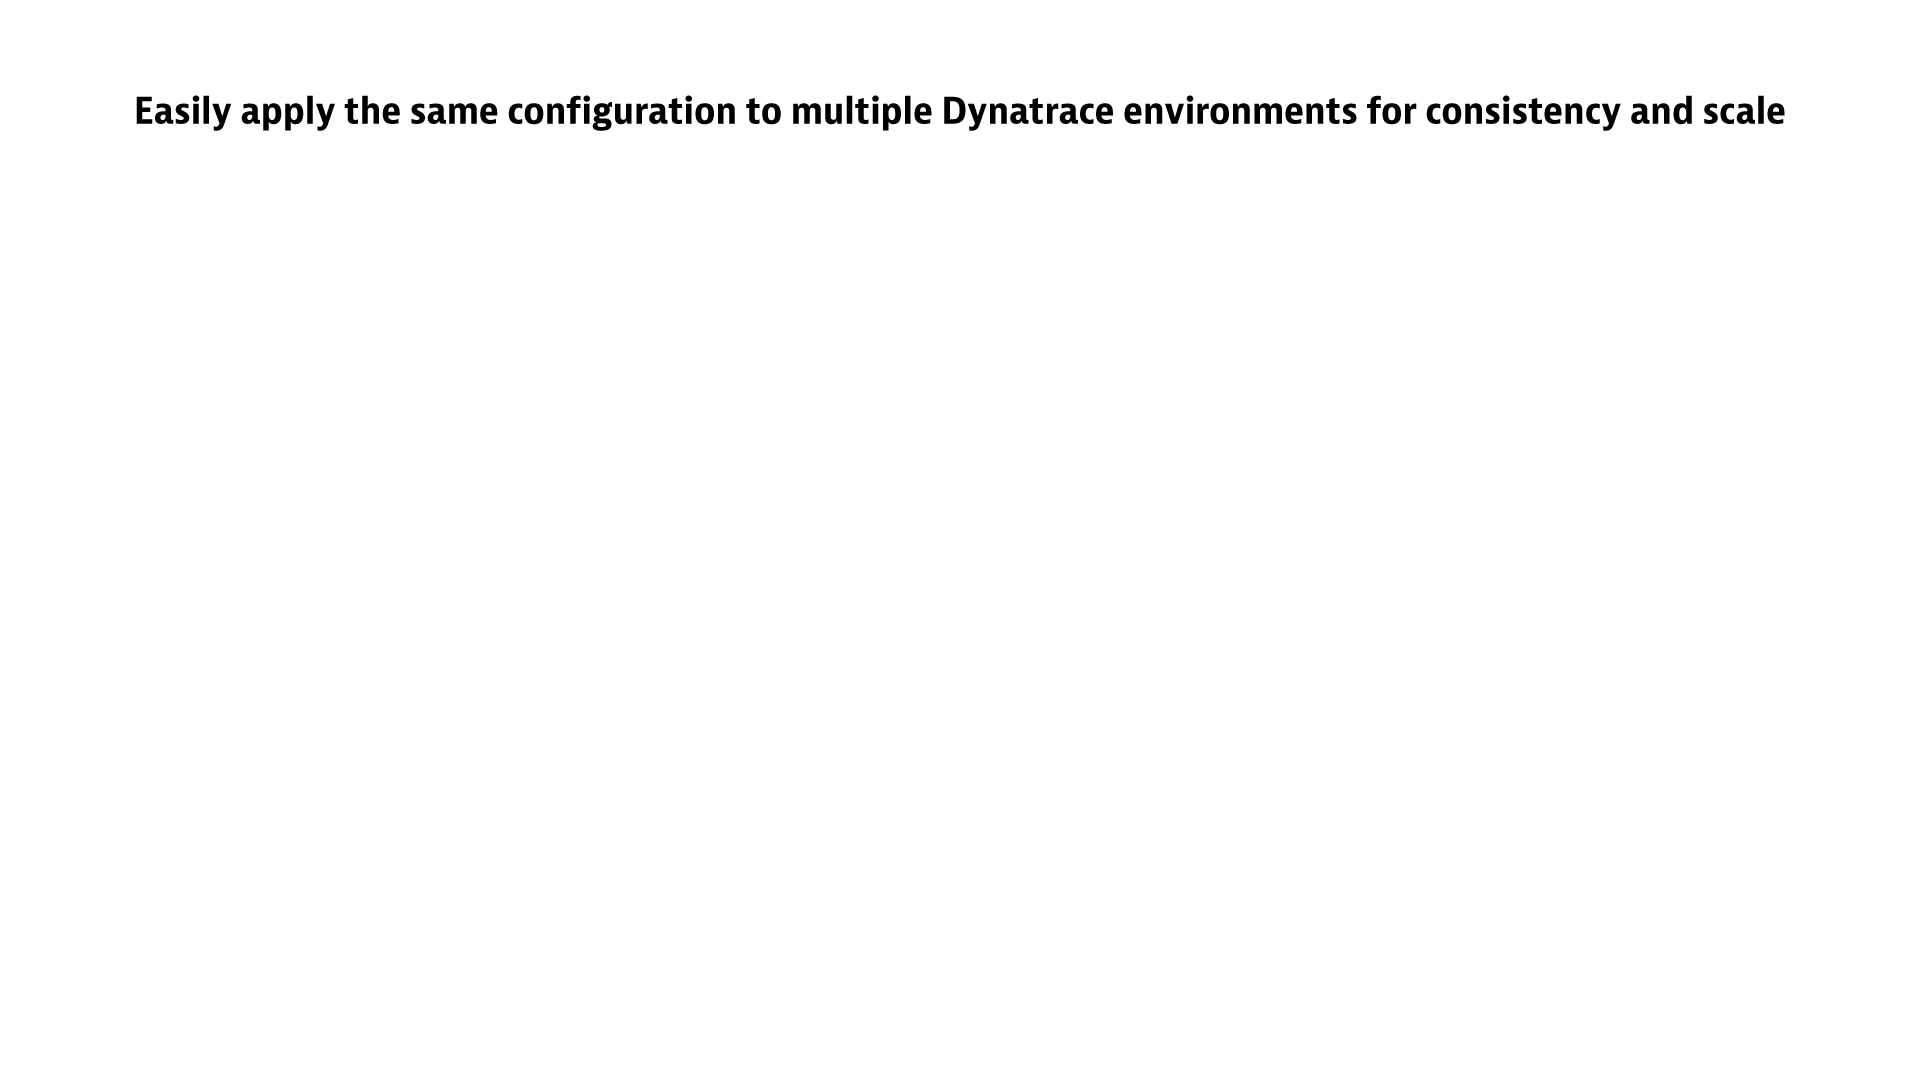 At Dynatrace, Monaco automates the configuration of all global Dynatrace environments without human intervention.